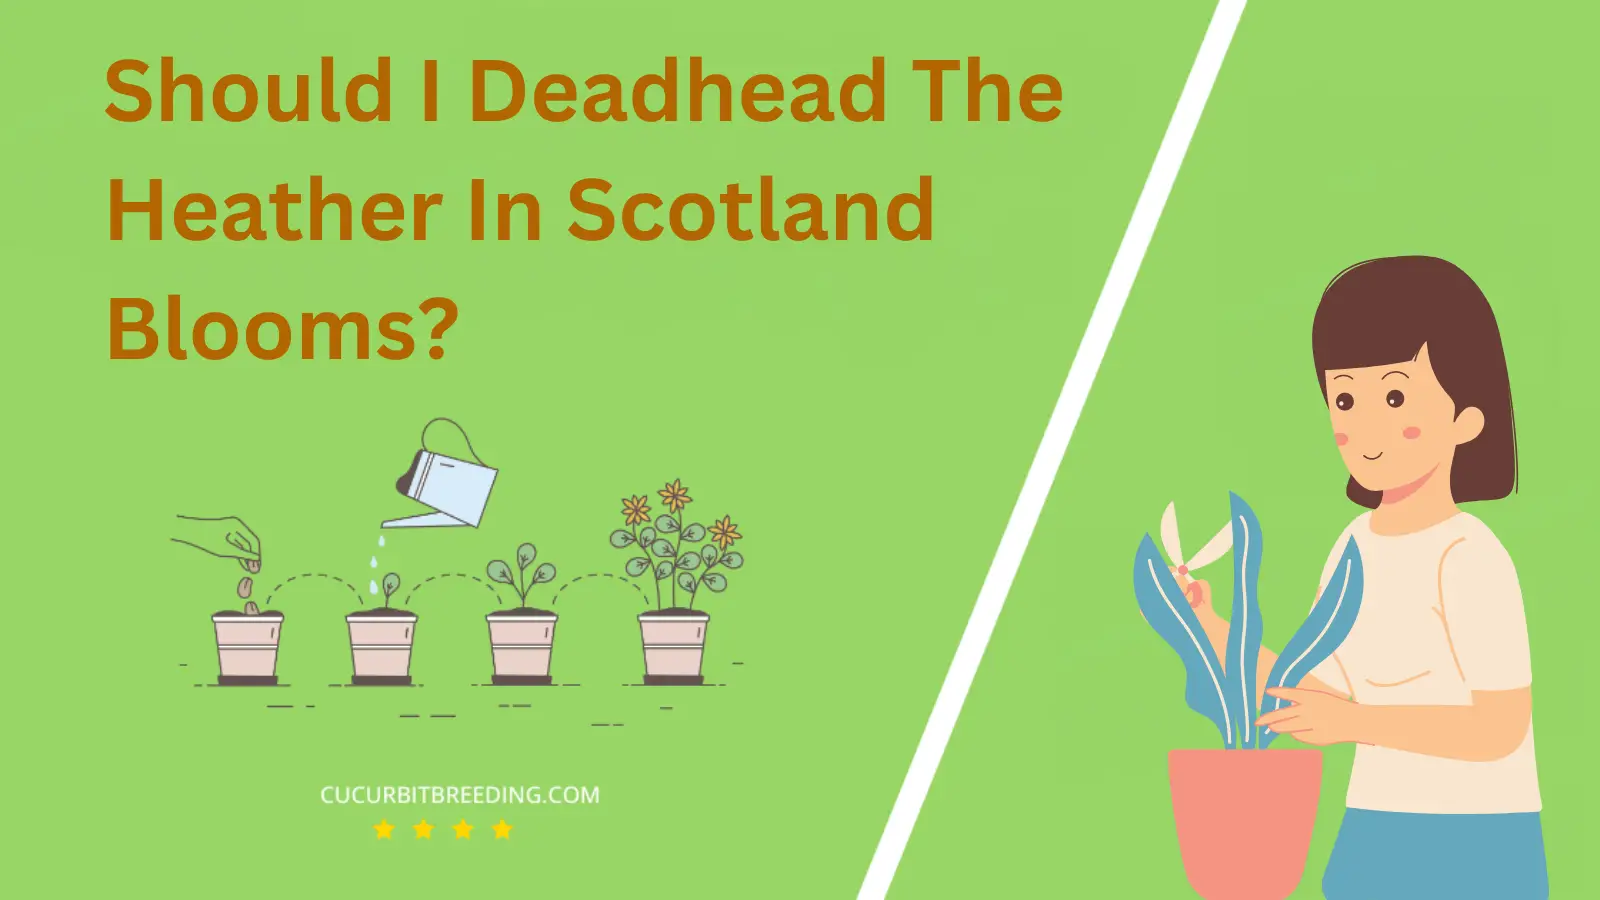 Should I Deadhead The Heather In Scotland Blooms?